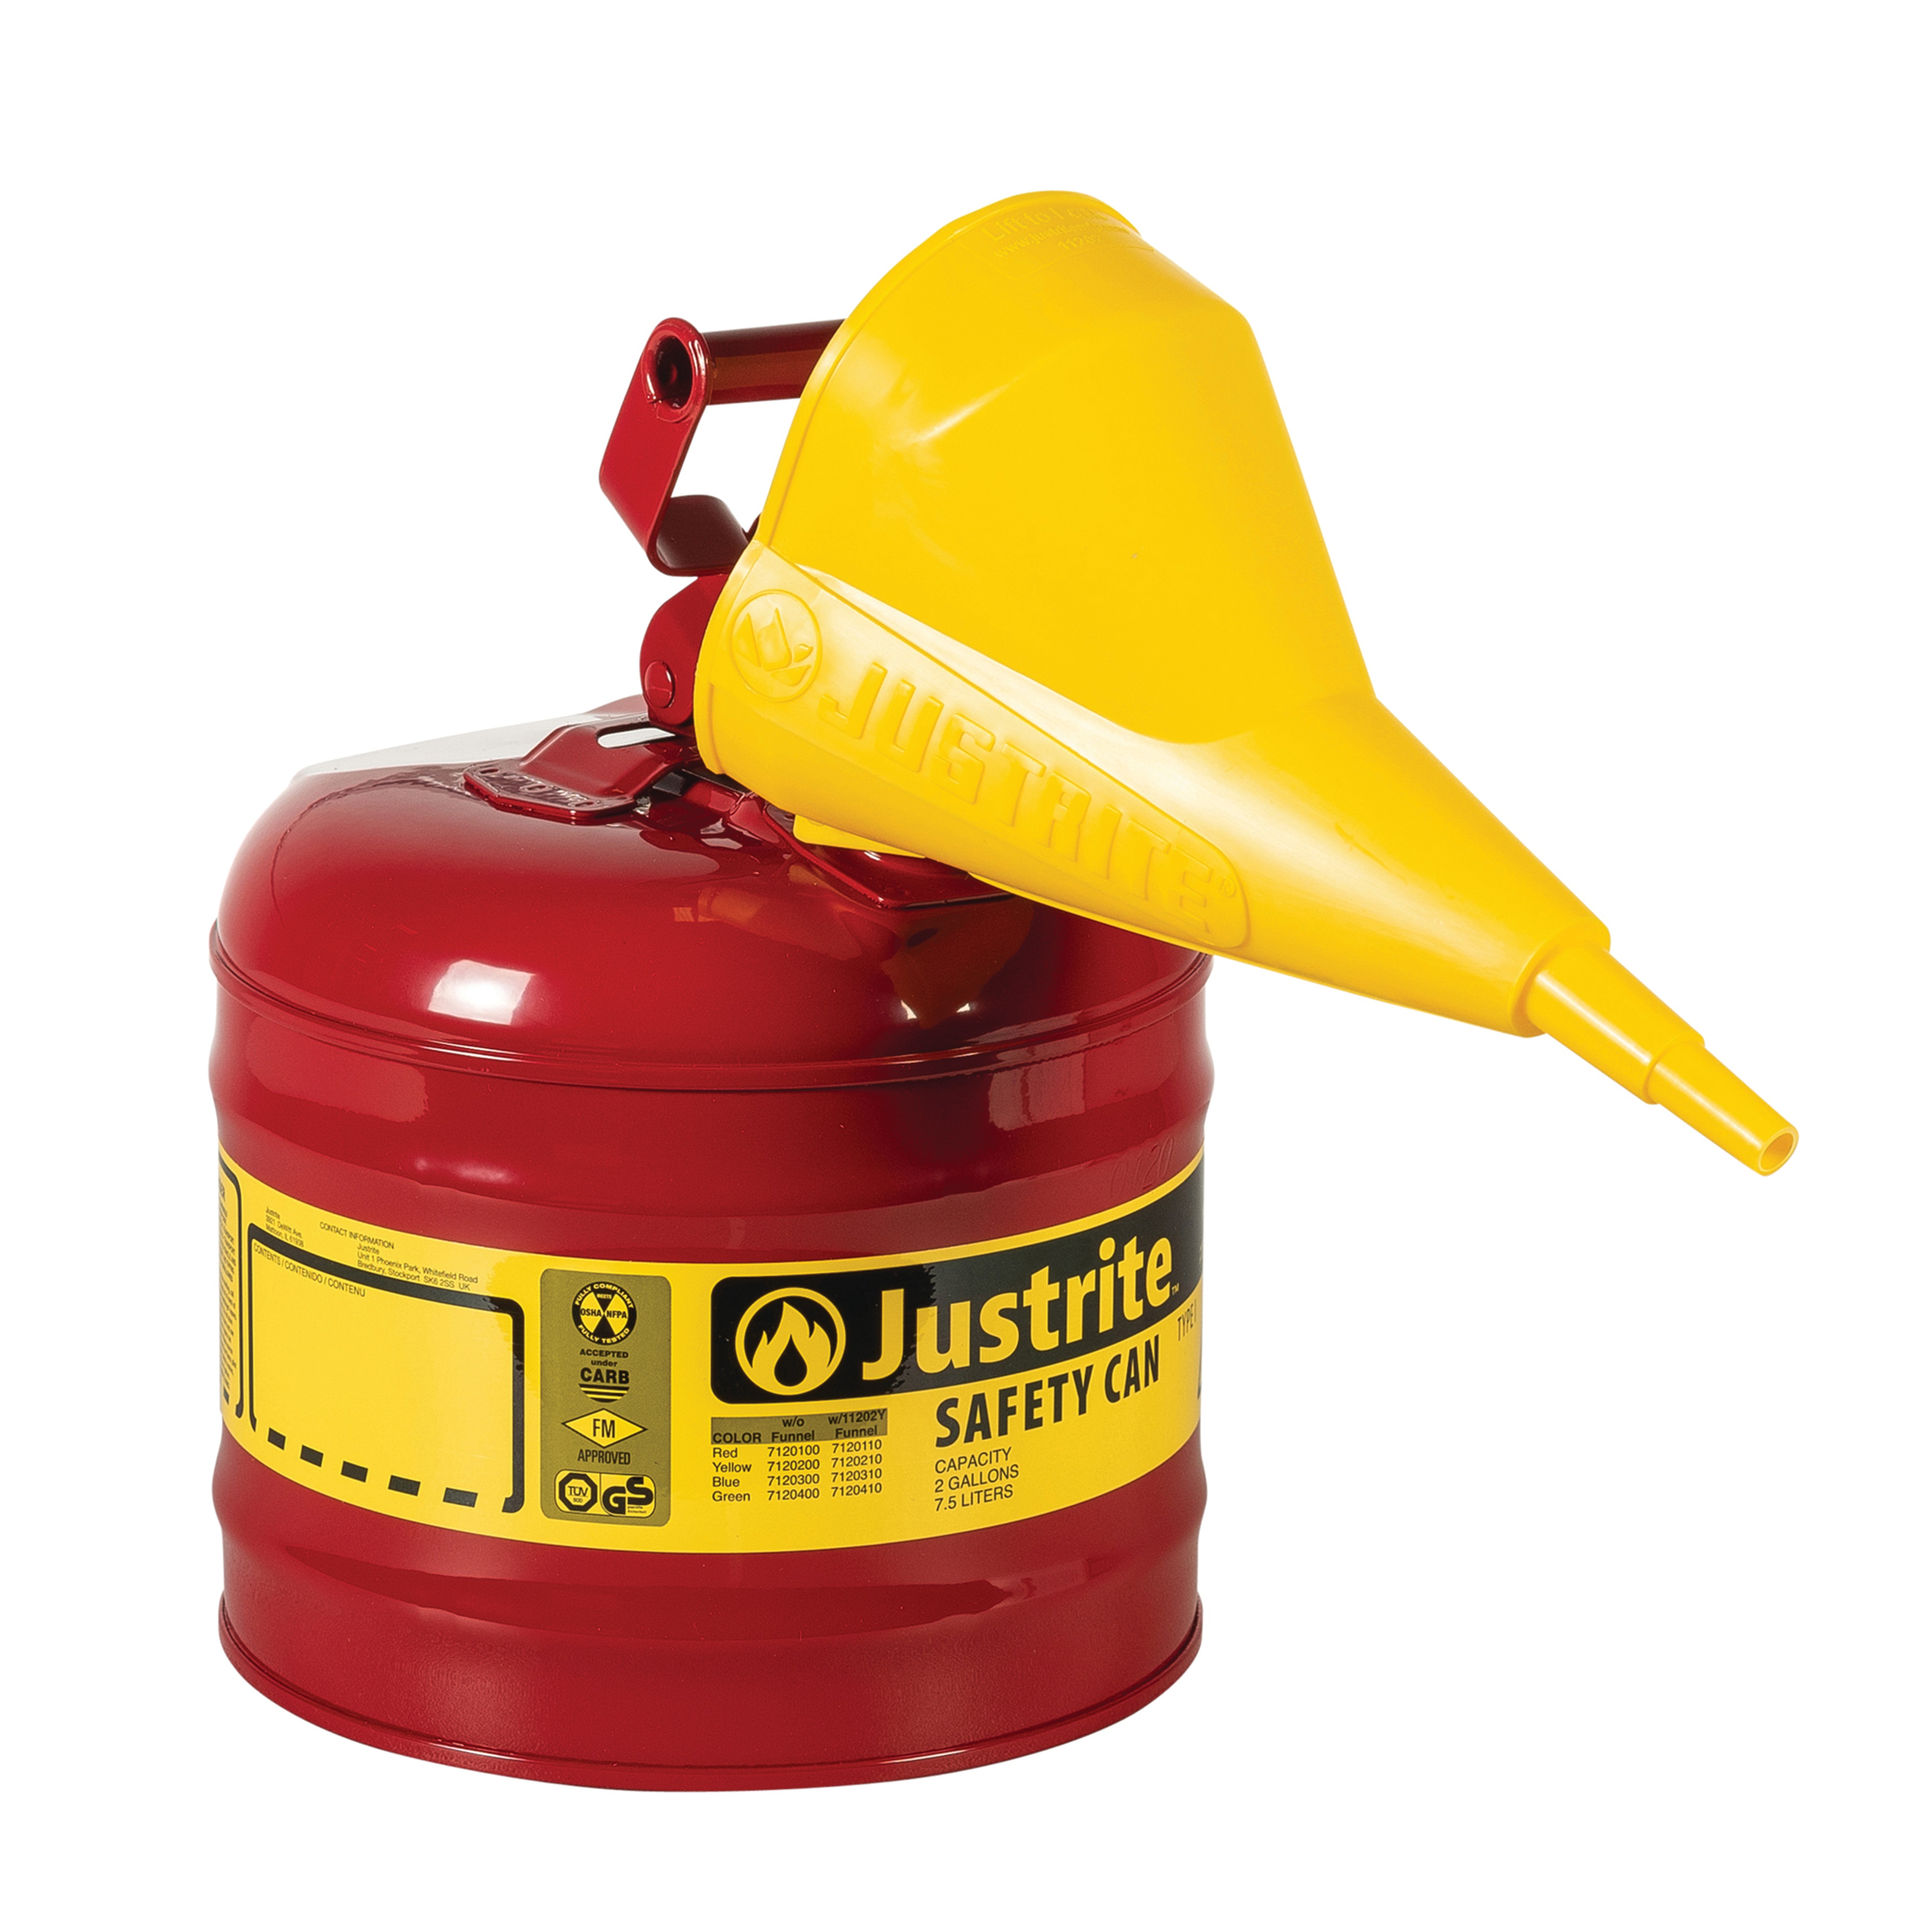 Justrite Swinging Handle Type 1 Safety Cans with Funnel Red - Spill Containment